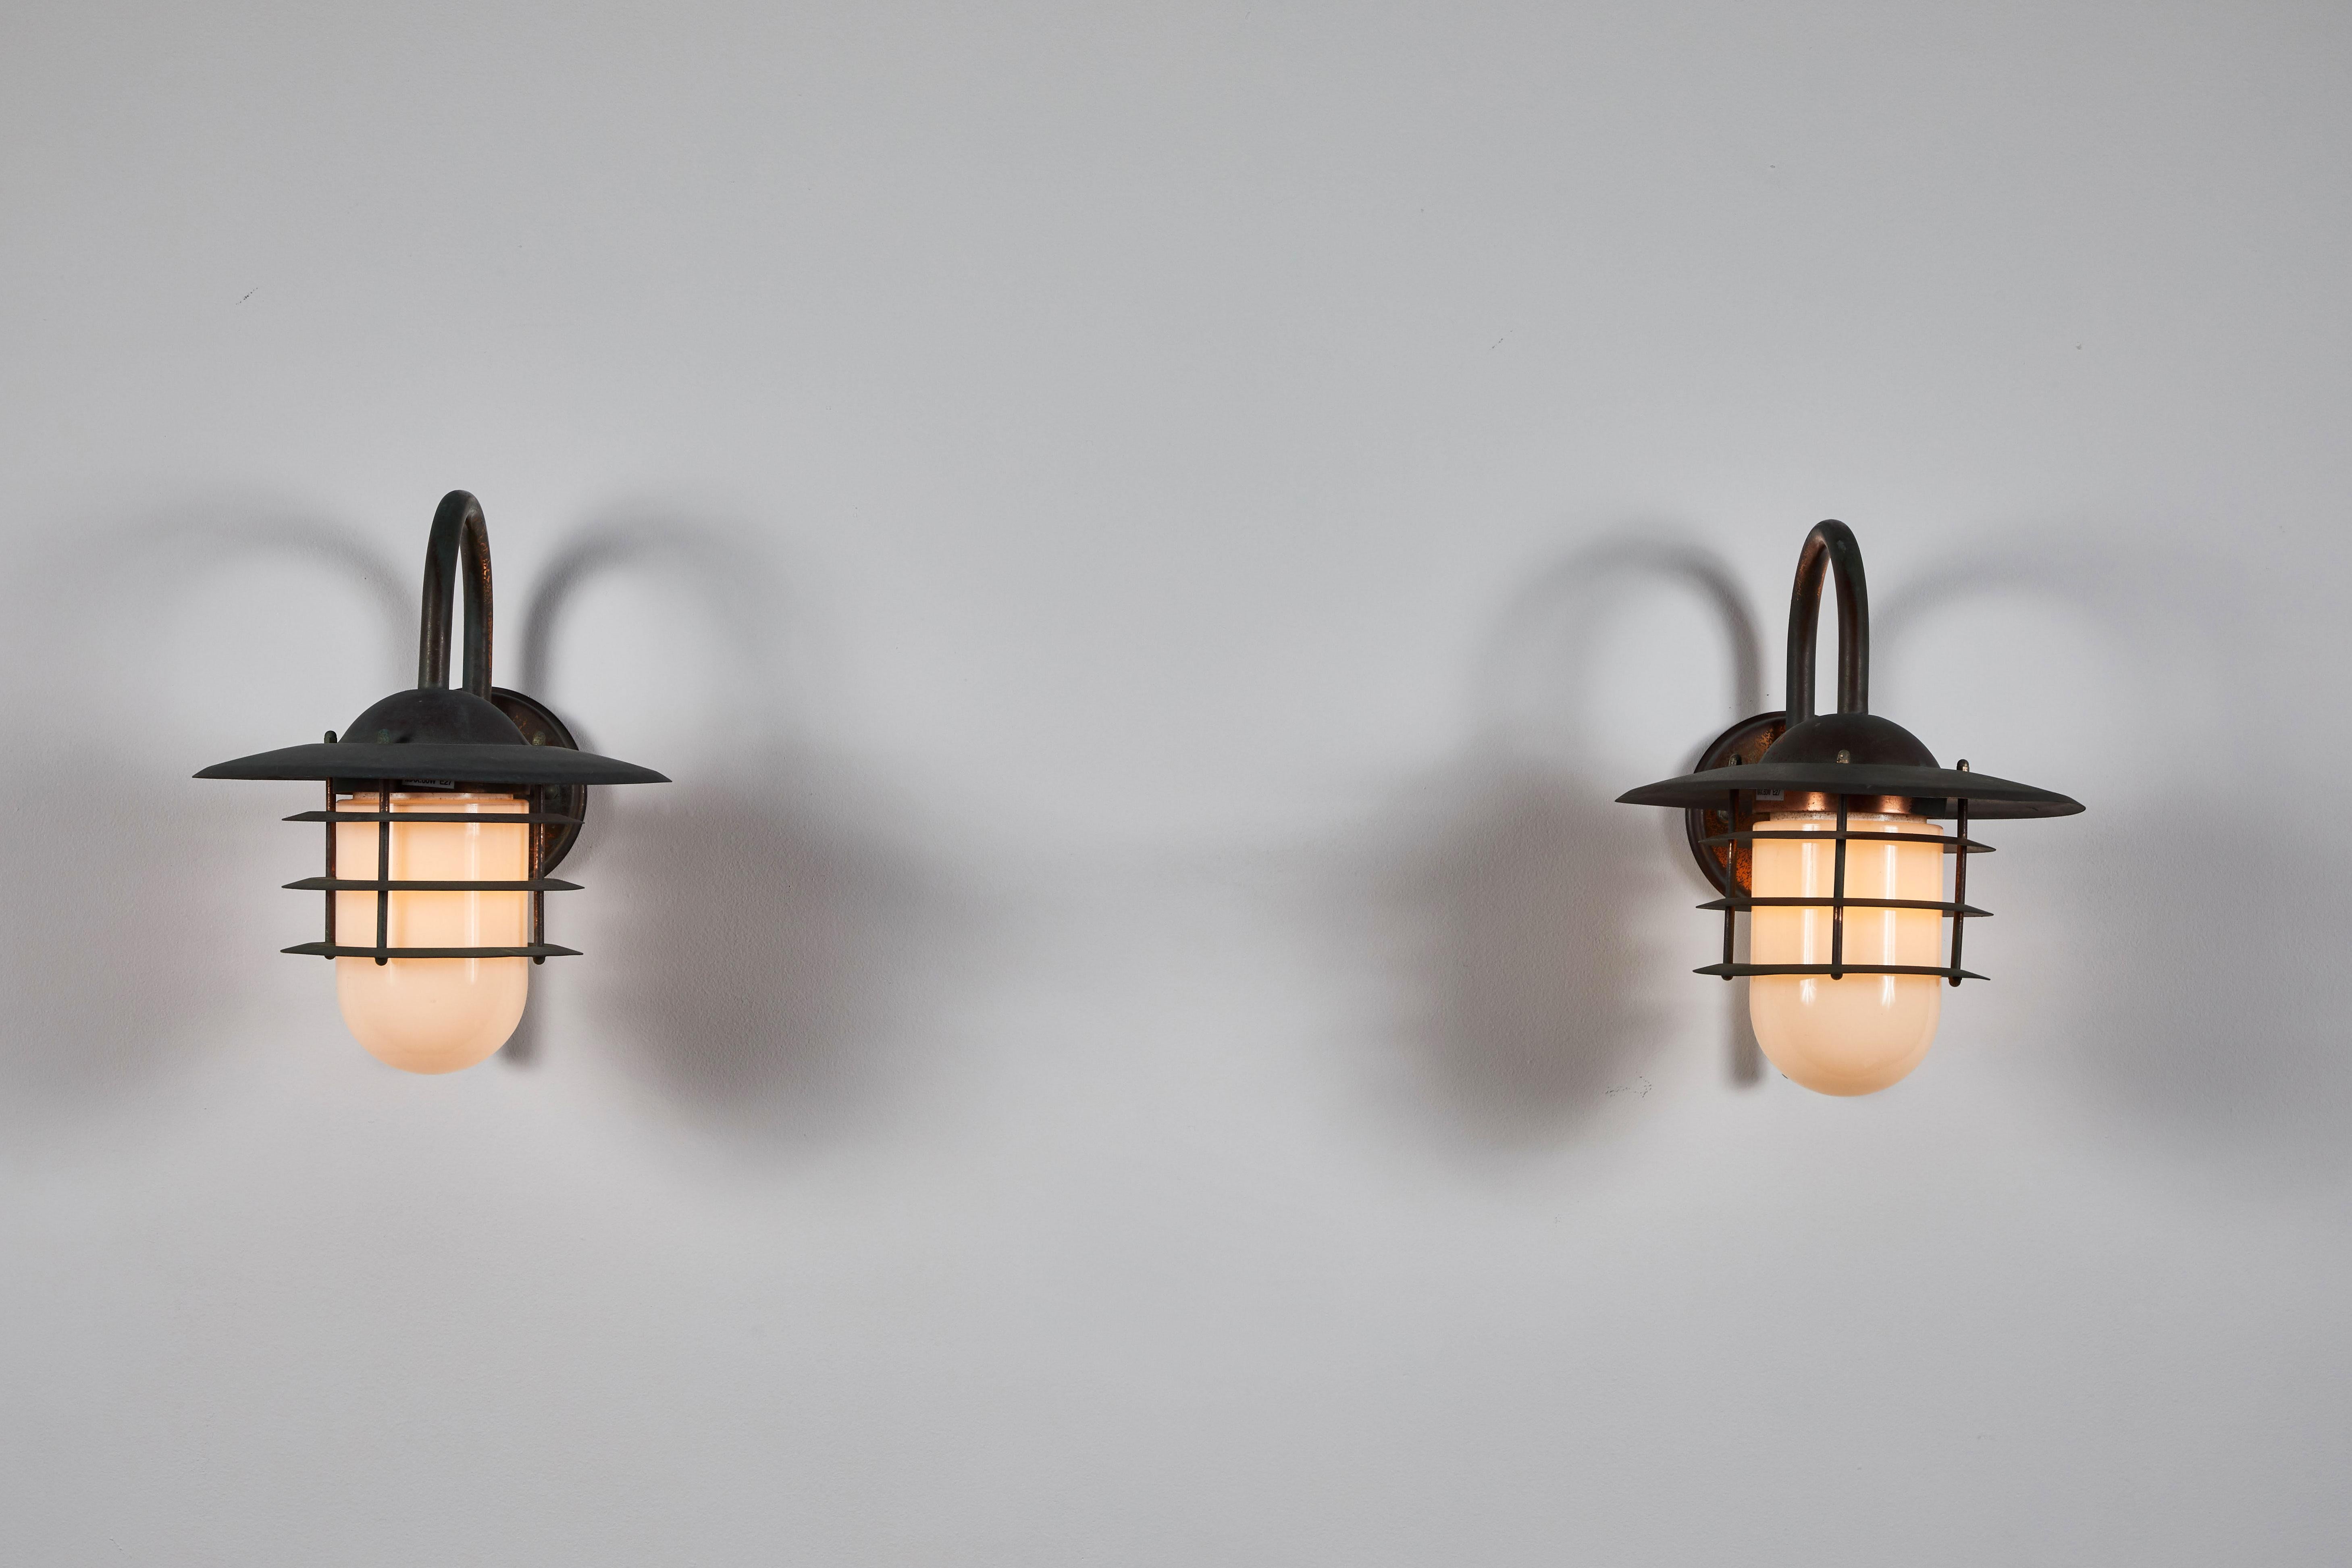 Pair of exterior sconces manufactured in Denmark, circa 1960s. Patinated copper with opaline glass. Rewired for US junction boxes. Each sconce takes one E27 60w maximum bulb. Bulbs provided as a one time courtesy.